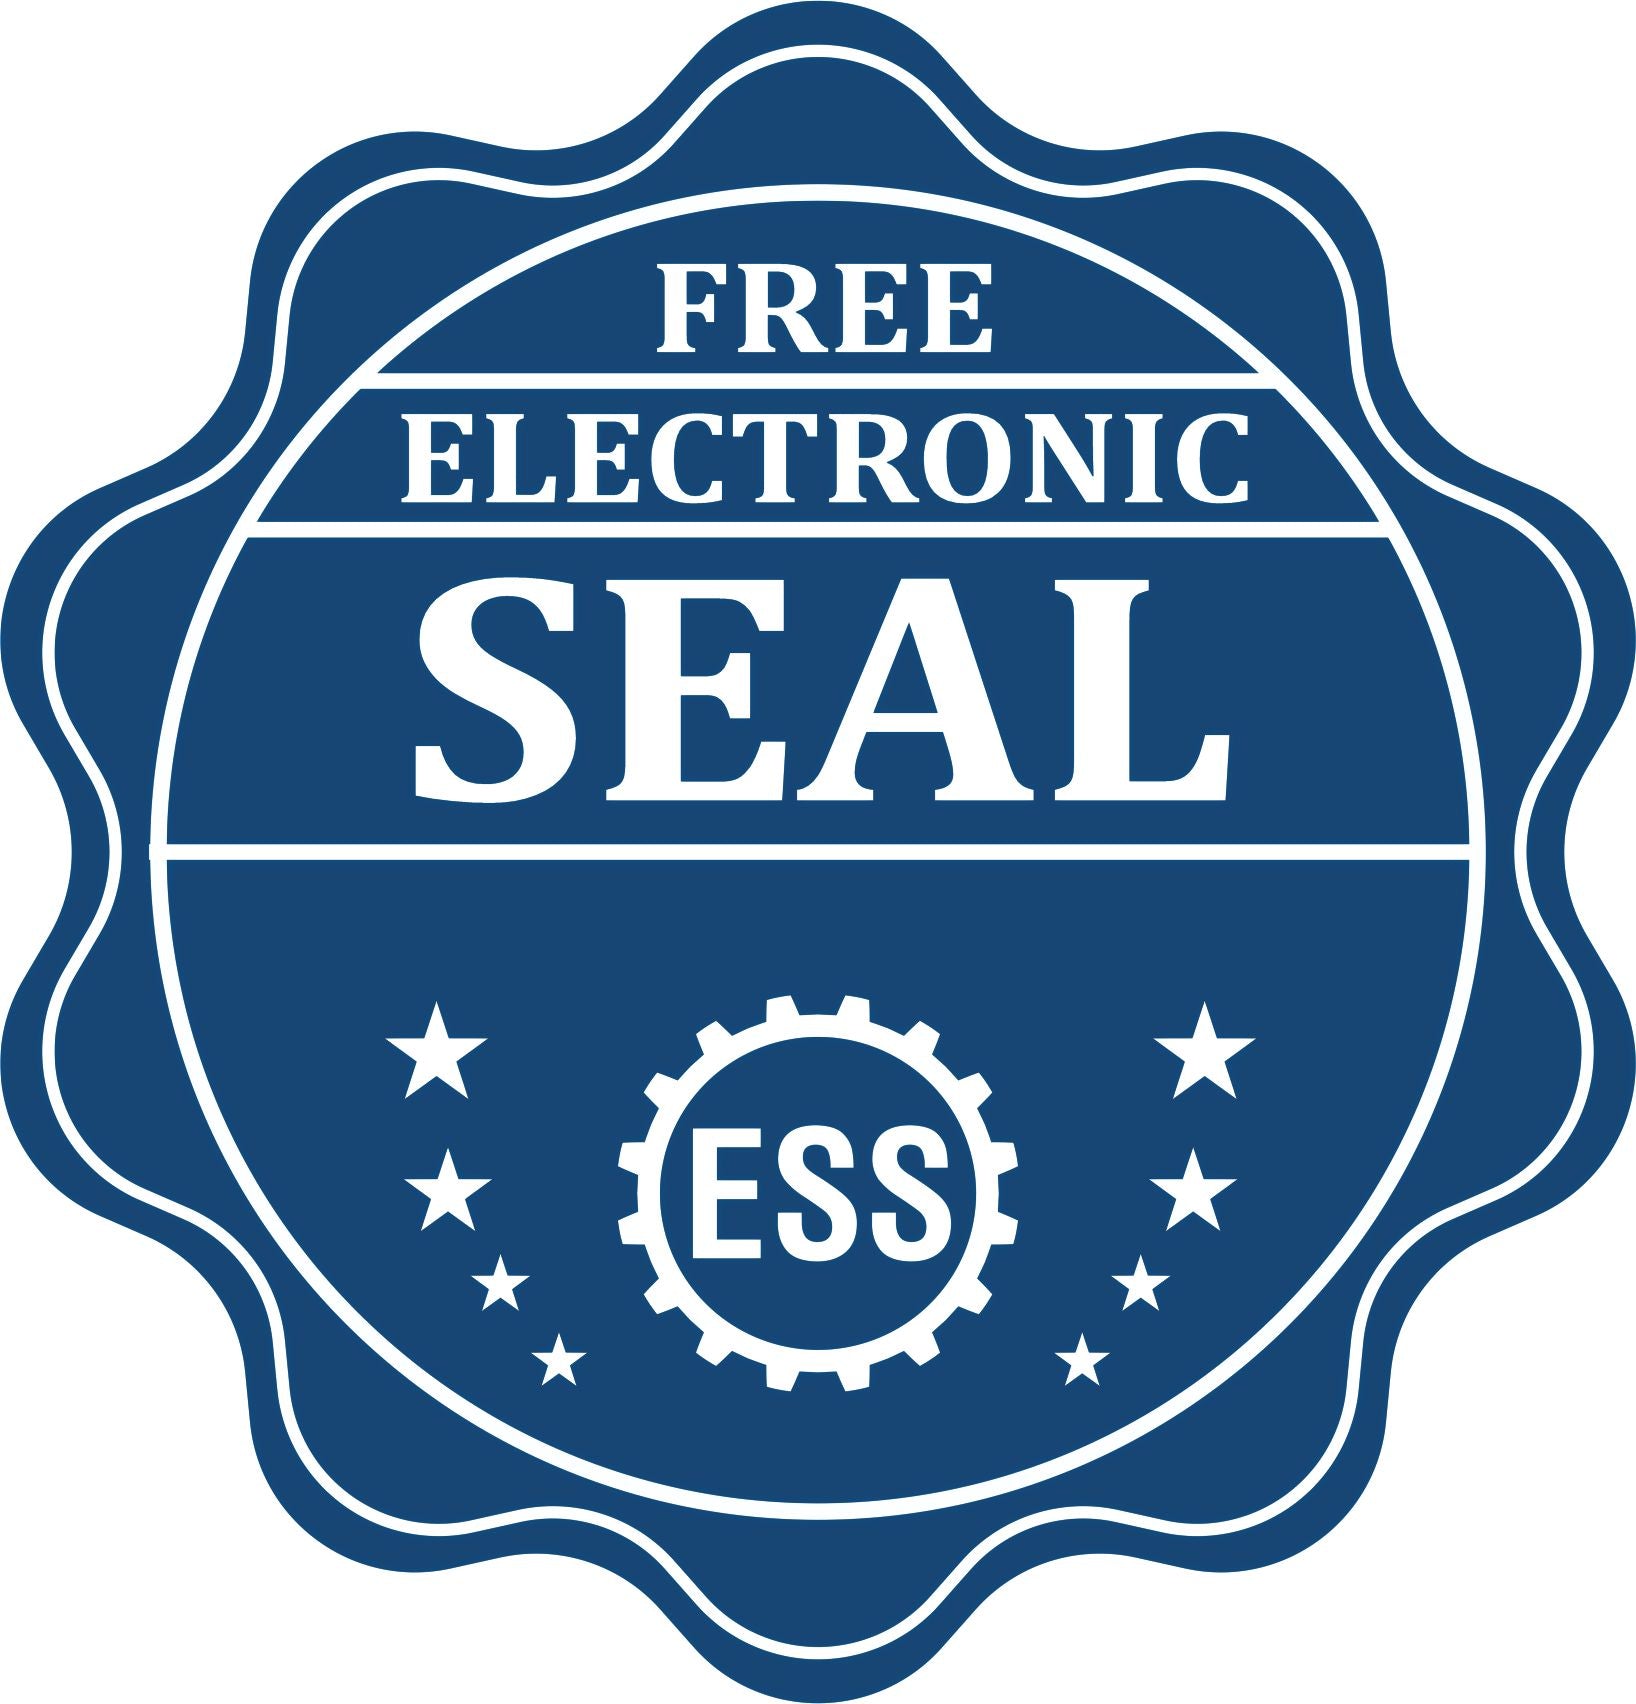 A badge showing a free electronic seal for the Hybrid Michigan Landscape Architect Seal with stars and the ESS gear on the emblem.